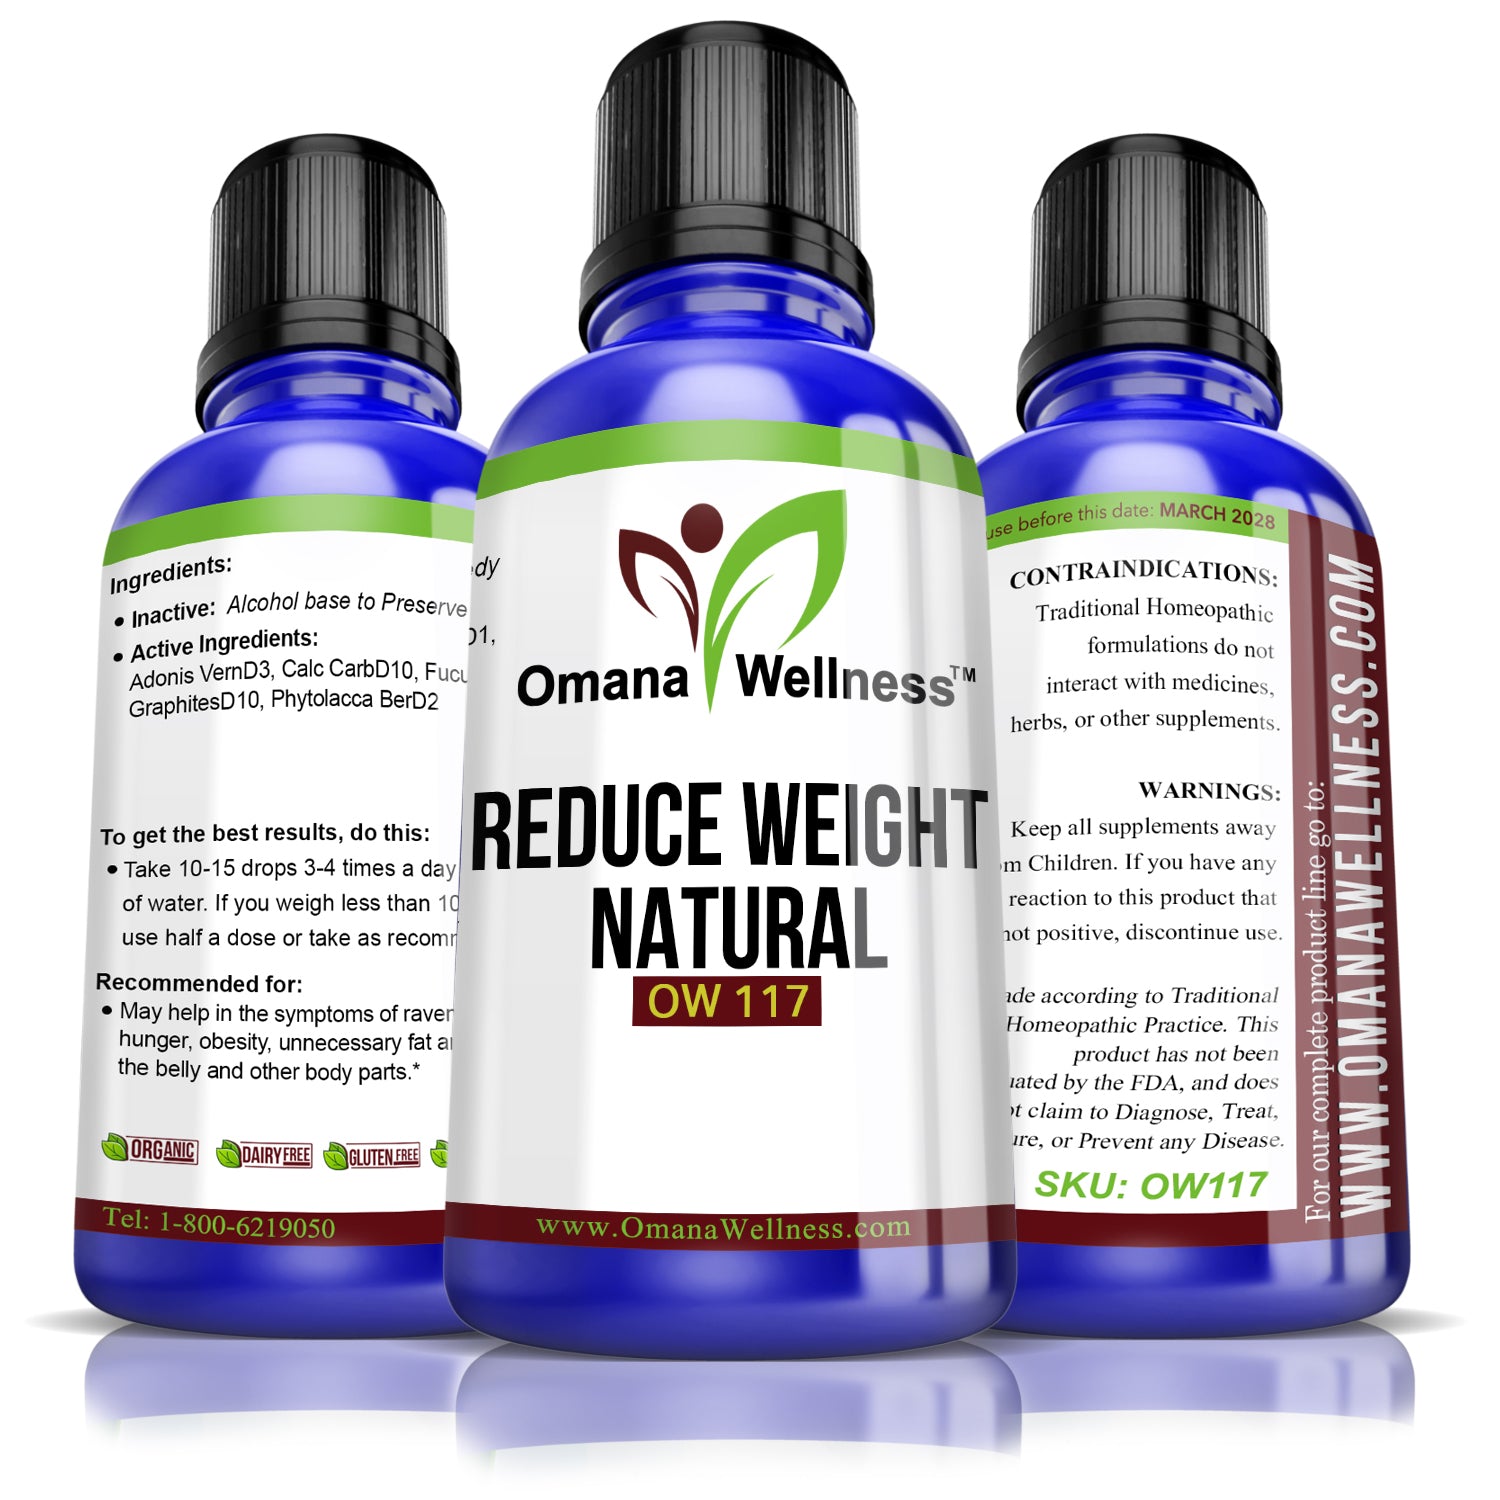 REDUCE WEIGHT NATURAL OW117